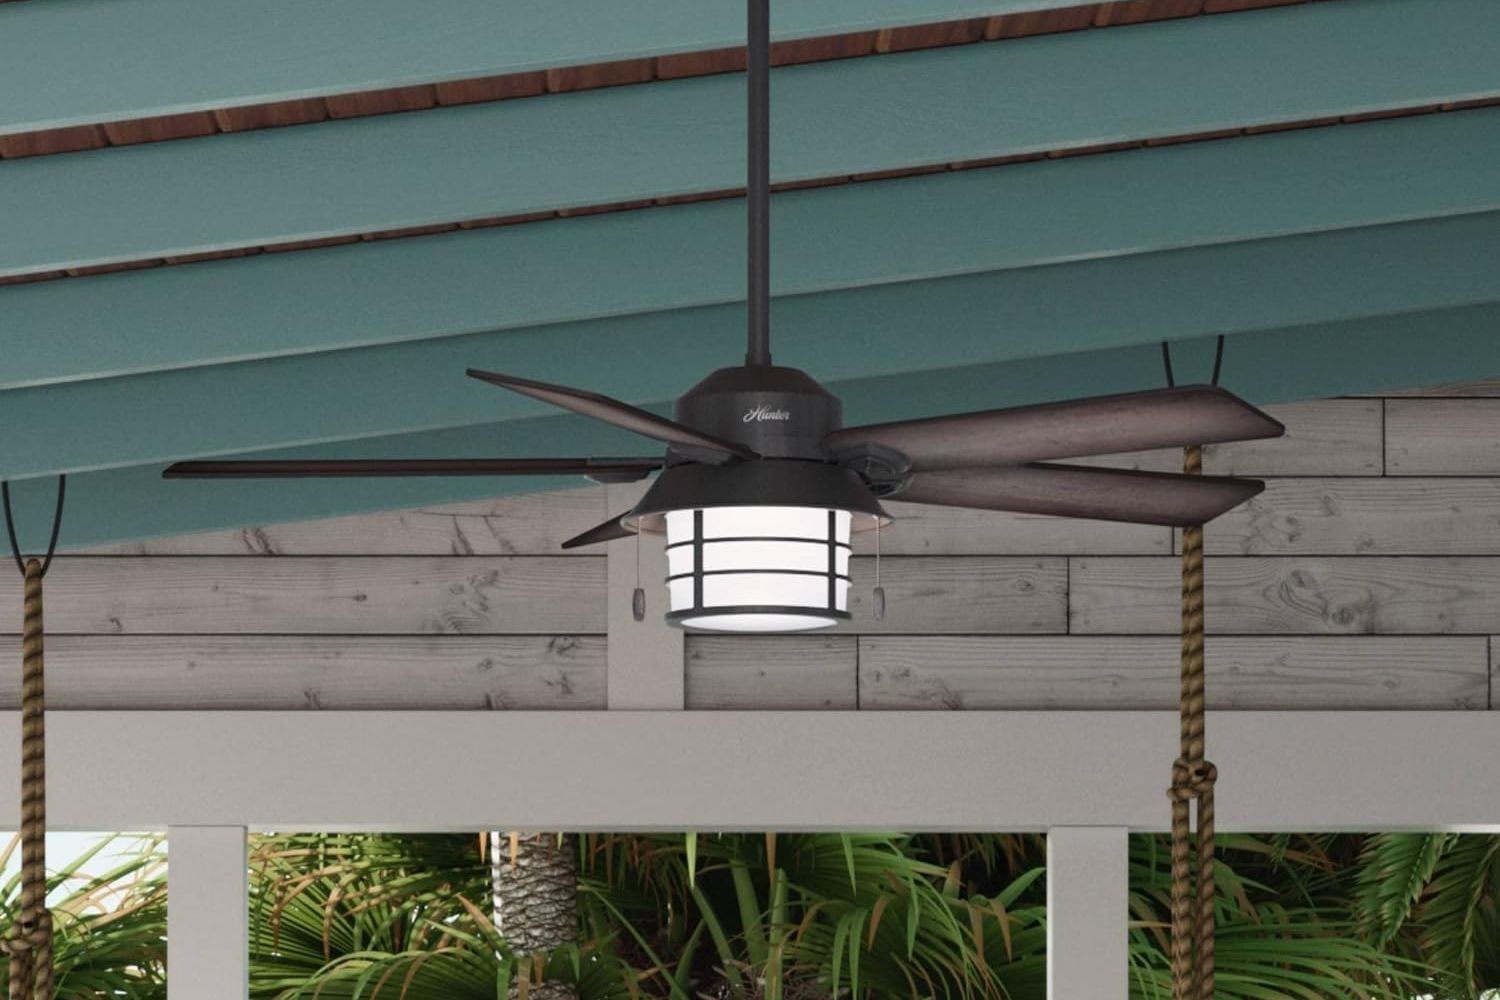 The Hunter Fan Company Key Biscayne Outdoor Fan installed over a patio to keep a seating area cool.